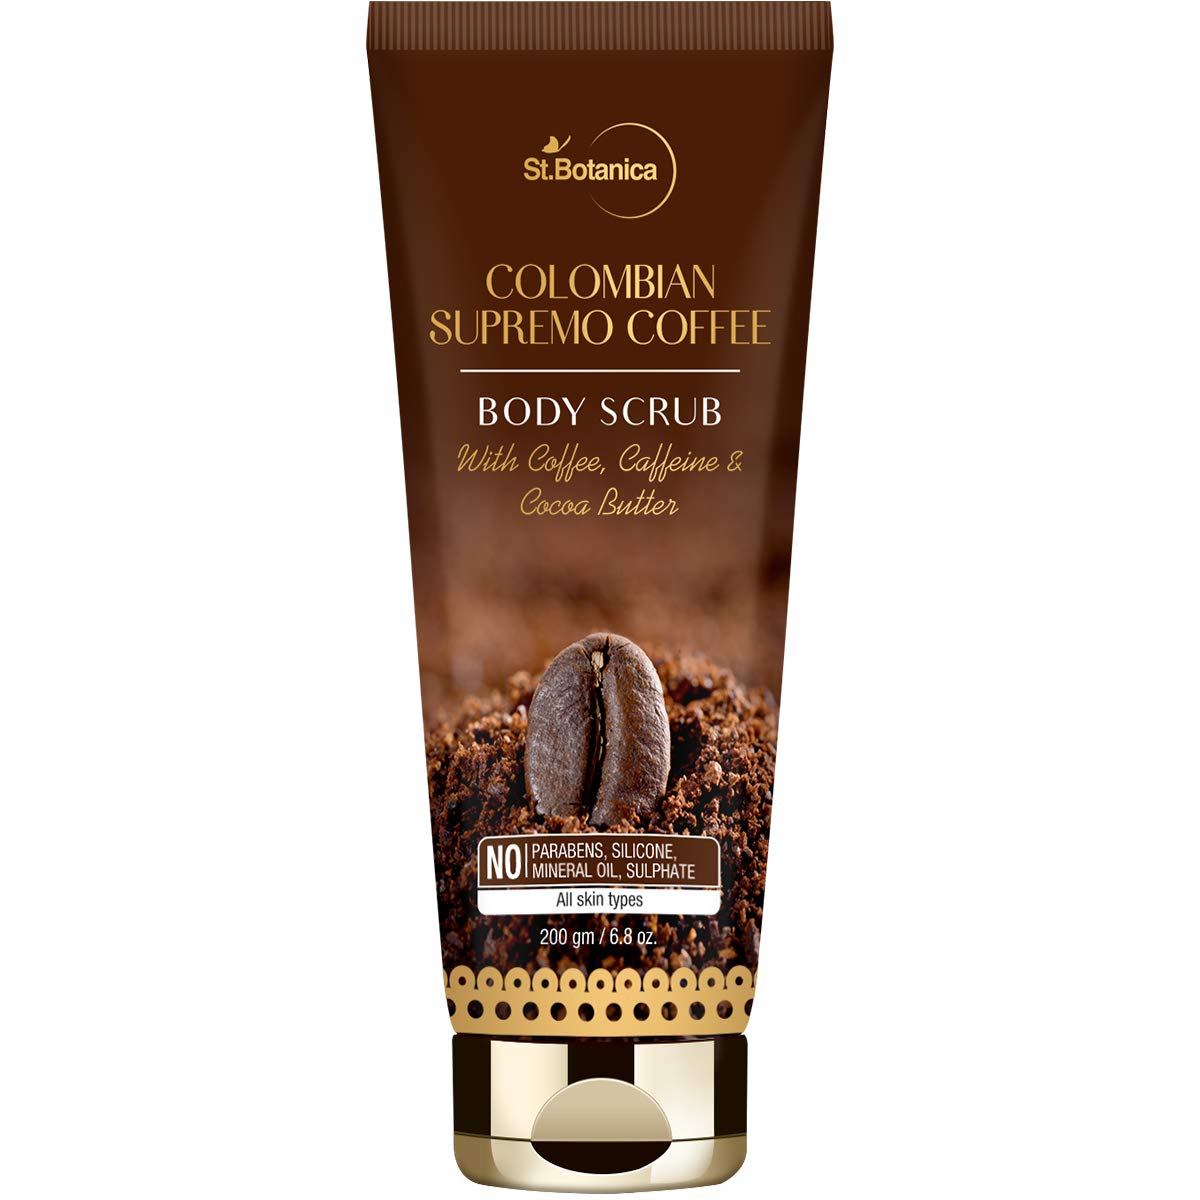 St. Botanica Colombian Supremo Coffee Body Scrub 200G | With Coffee, Caffeine And Cocoa Butter |No Sls, Paraben